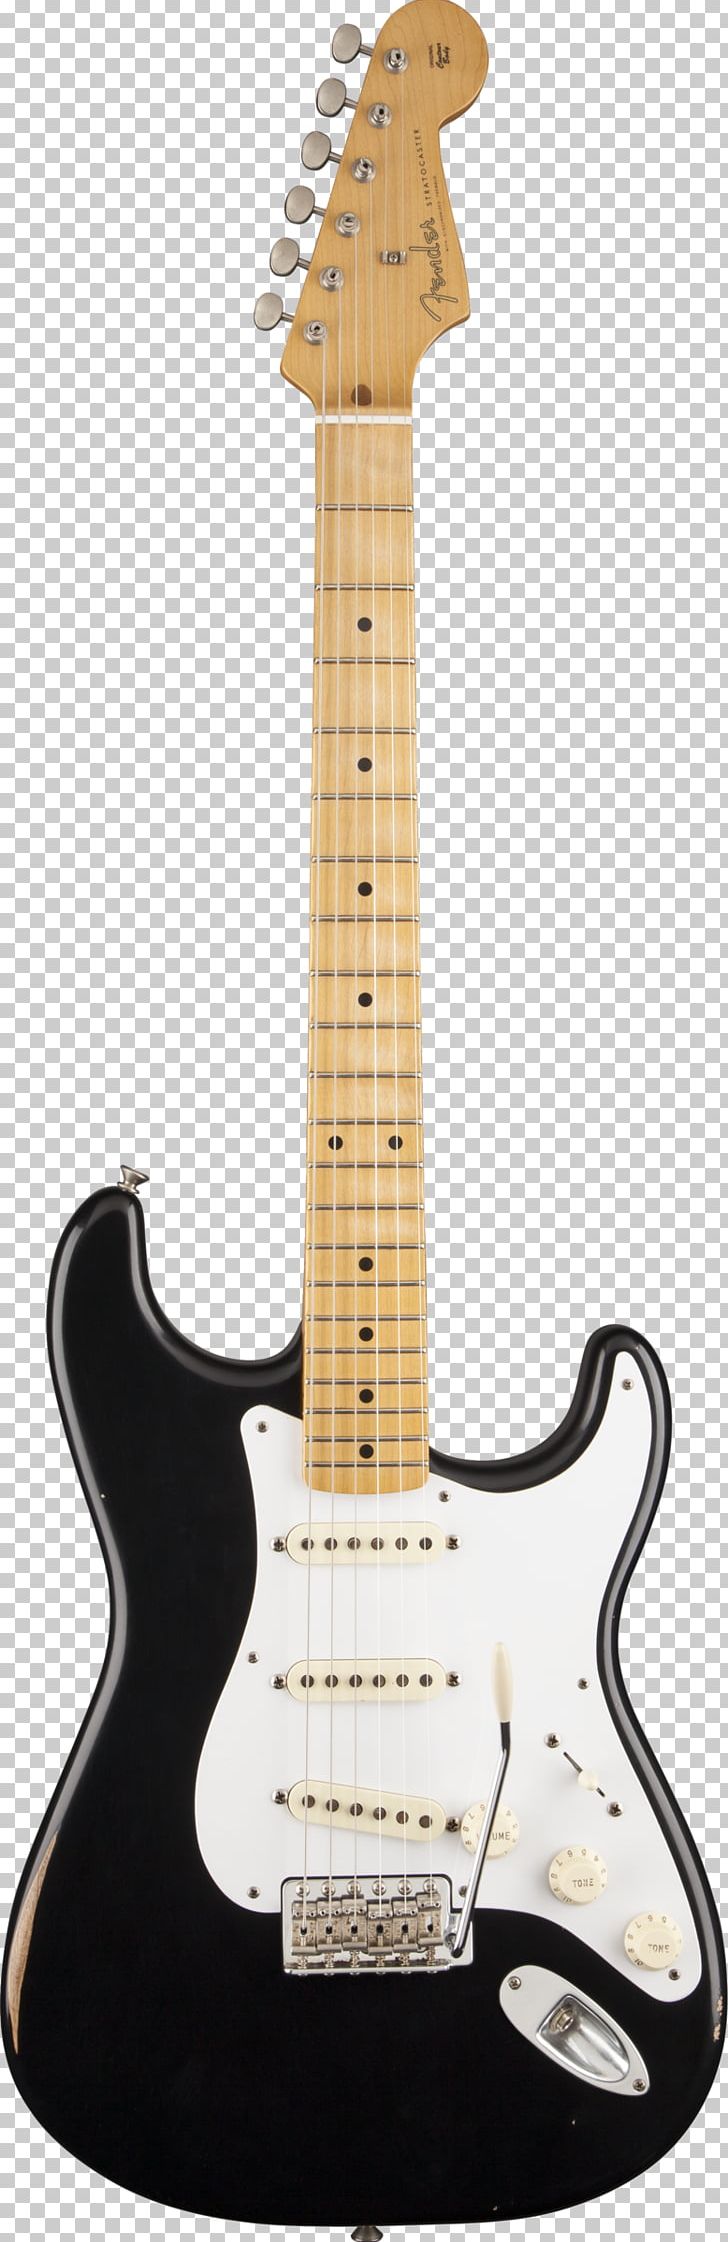 1970s Fender Stratocaster Fender Classic Series 70s Stratocaster Electric Guitar Fender Musical Instruments Corporation PNG, Clipart, 70s, 1970s, Classic Series, Electric Guitar, Fender Stratocaster Free PNG Download